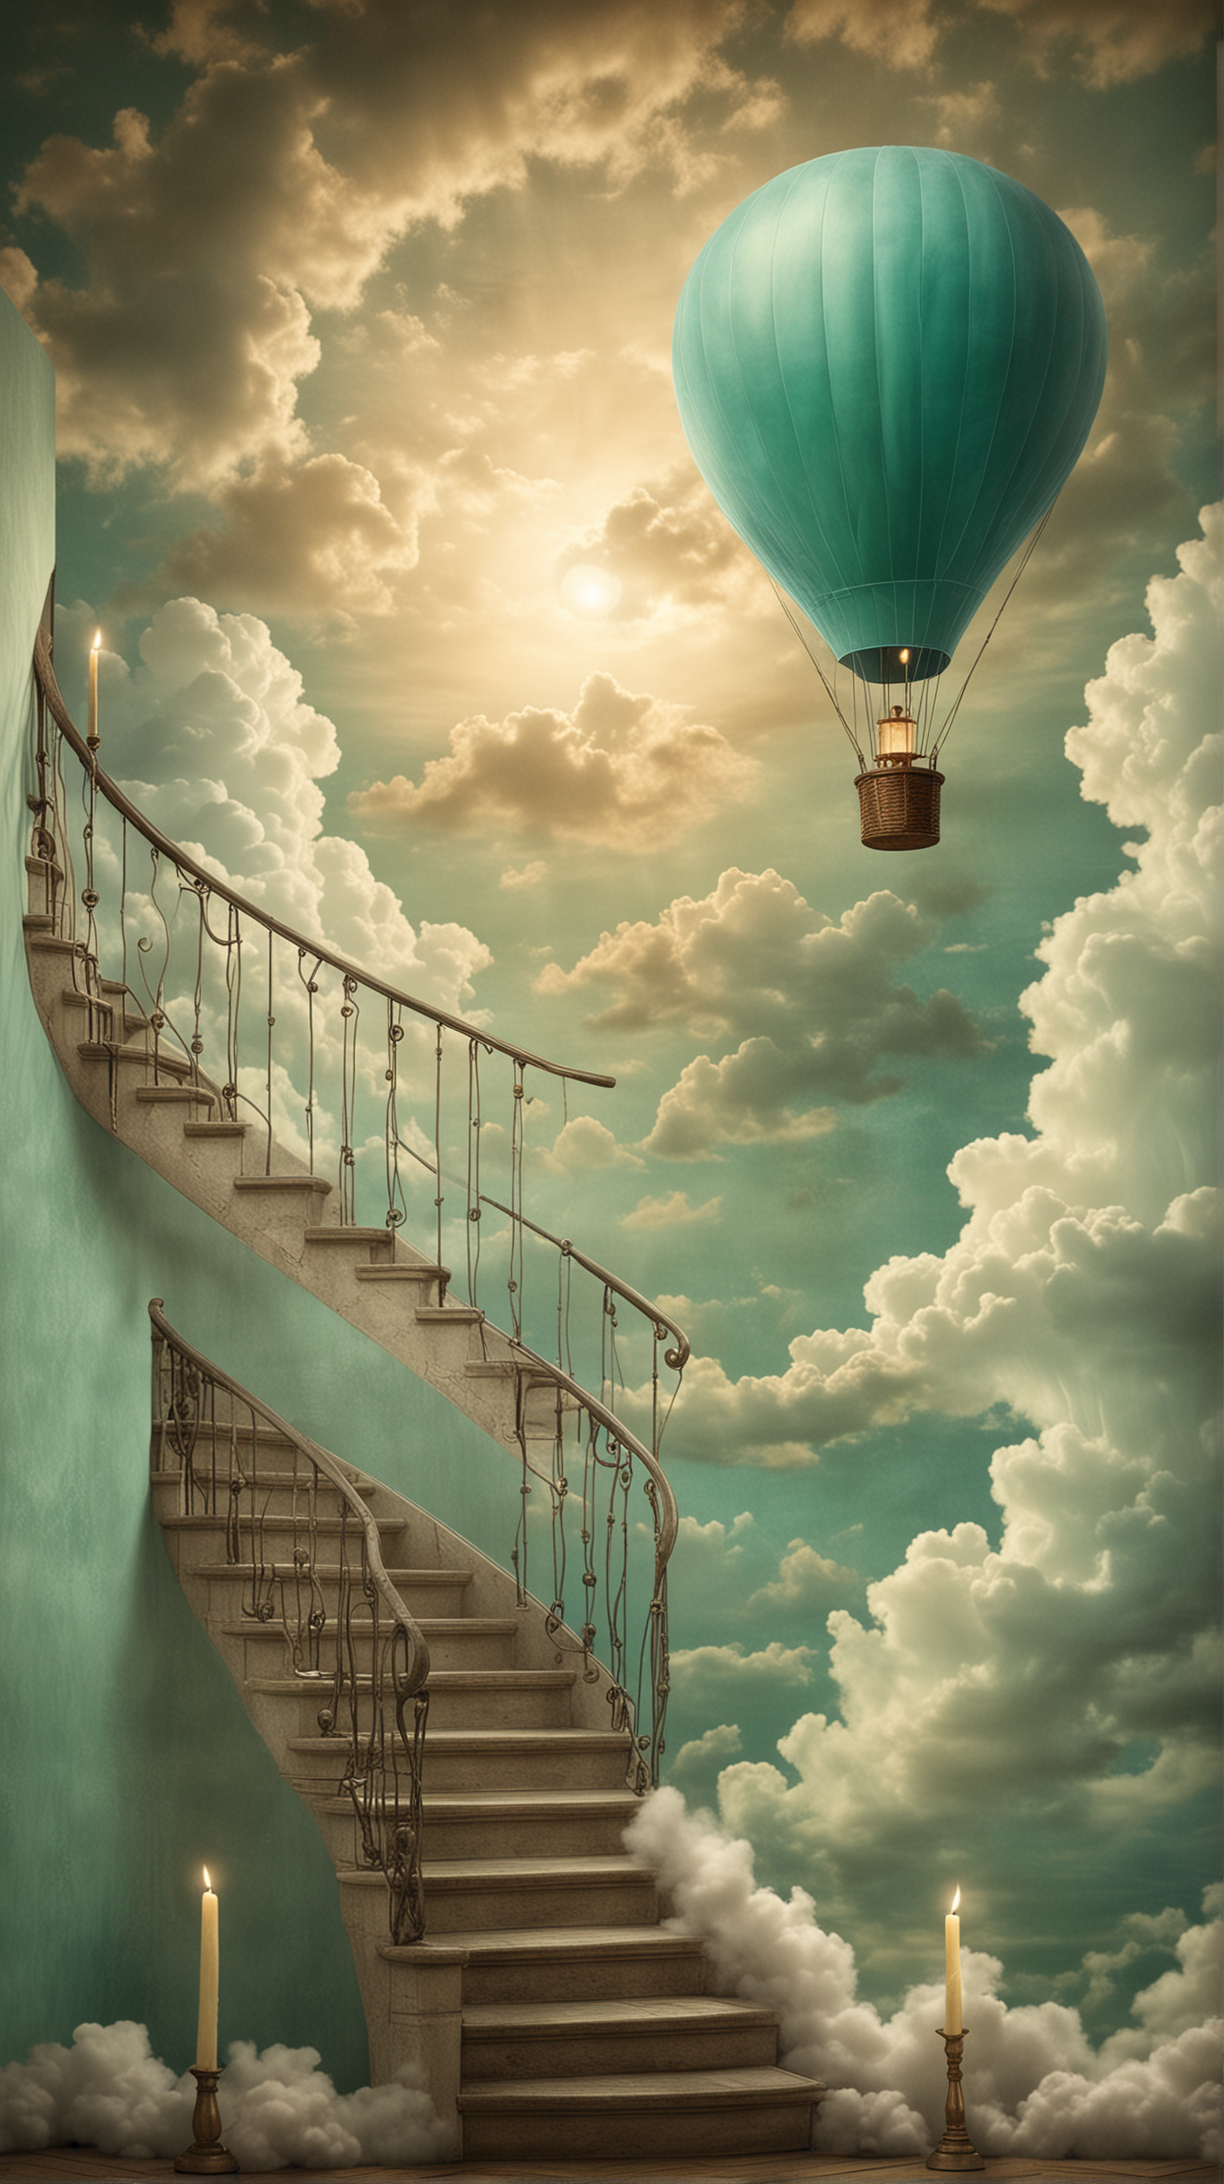 In the style of Christian Schloe, staircase lit by candles with clouds and a turquoise hot air balloon